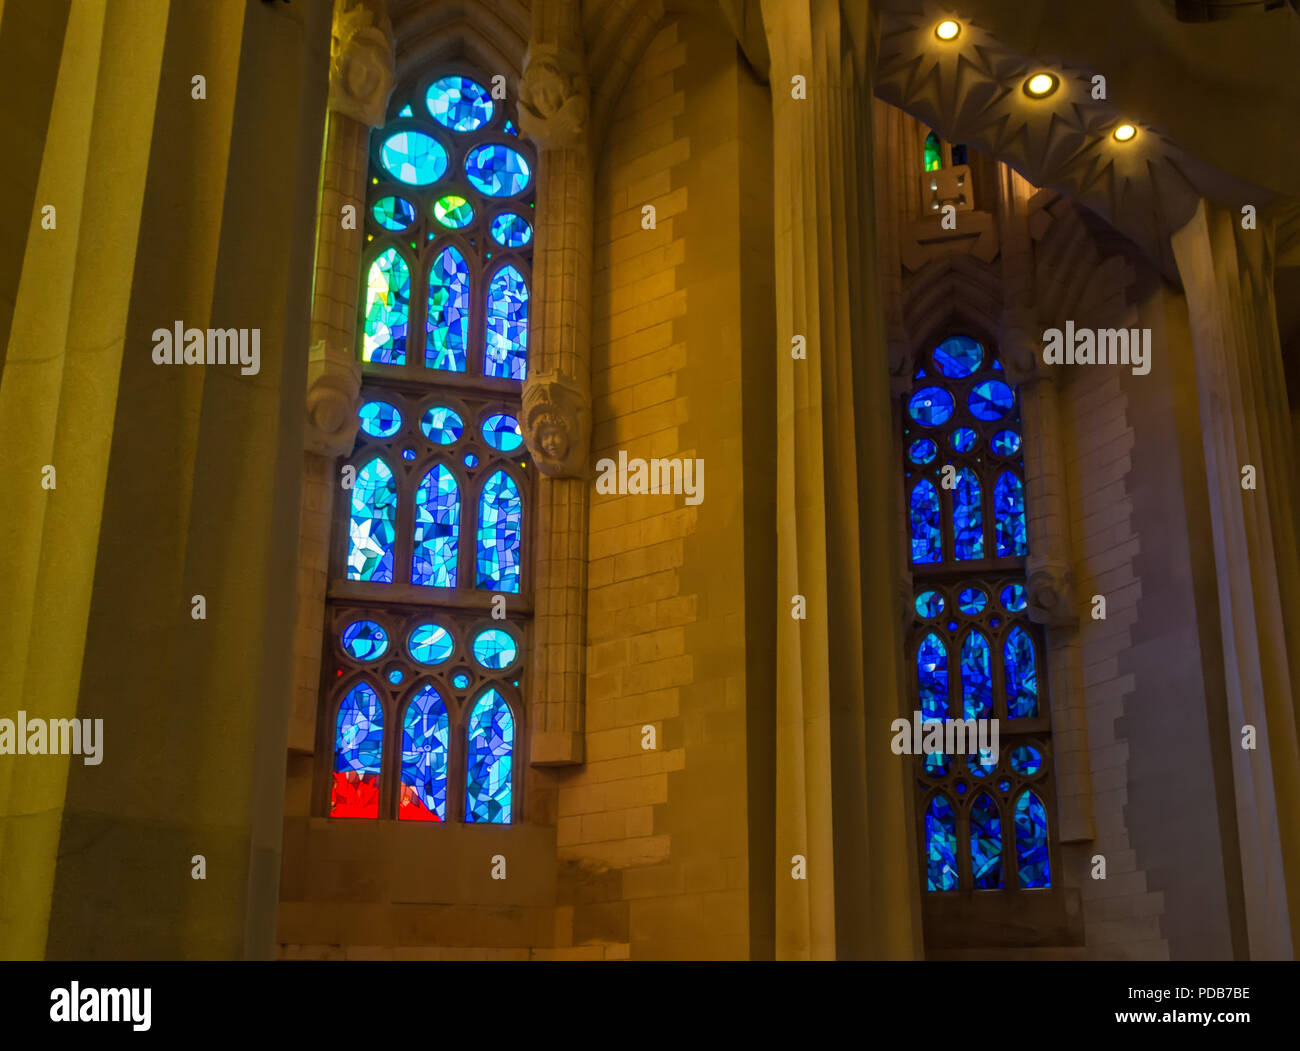 Colorful geometric stained glass windows in the Sagrada Familia - large unfinished Roman Catholic church in Barcelona, designed by Catalan architect A Stock Photo